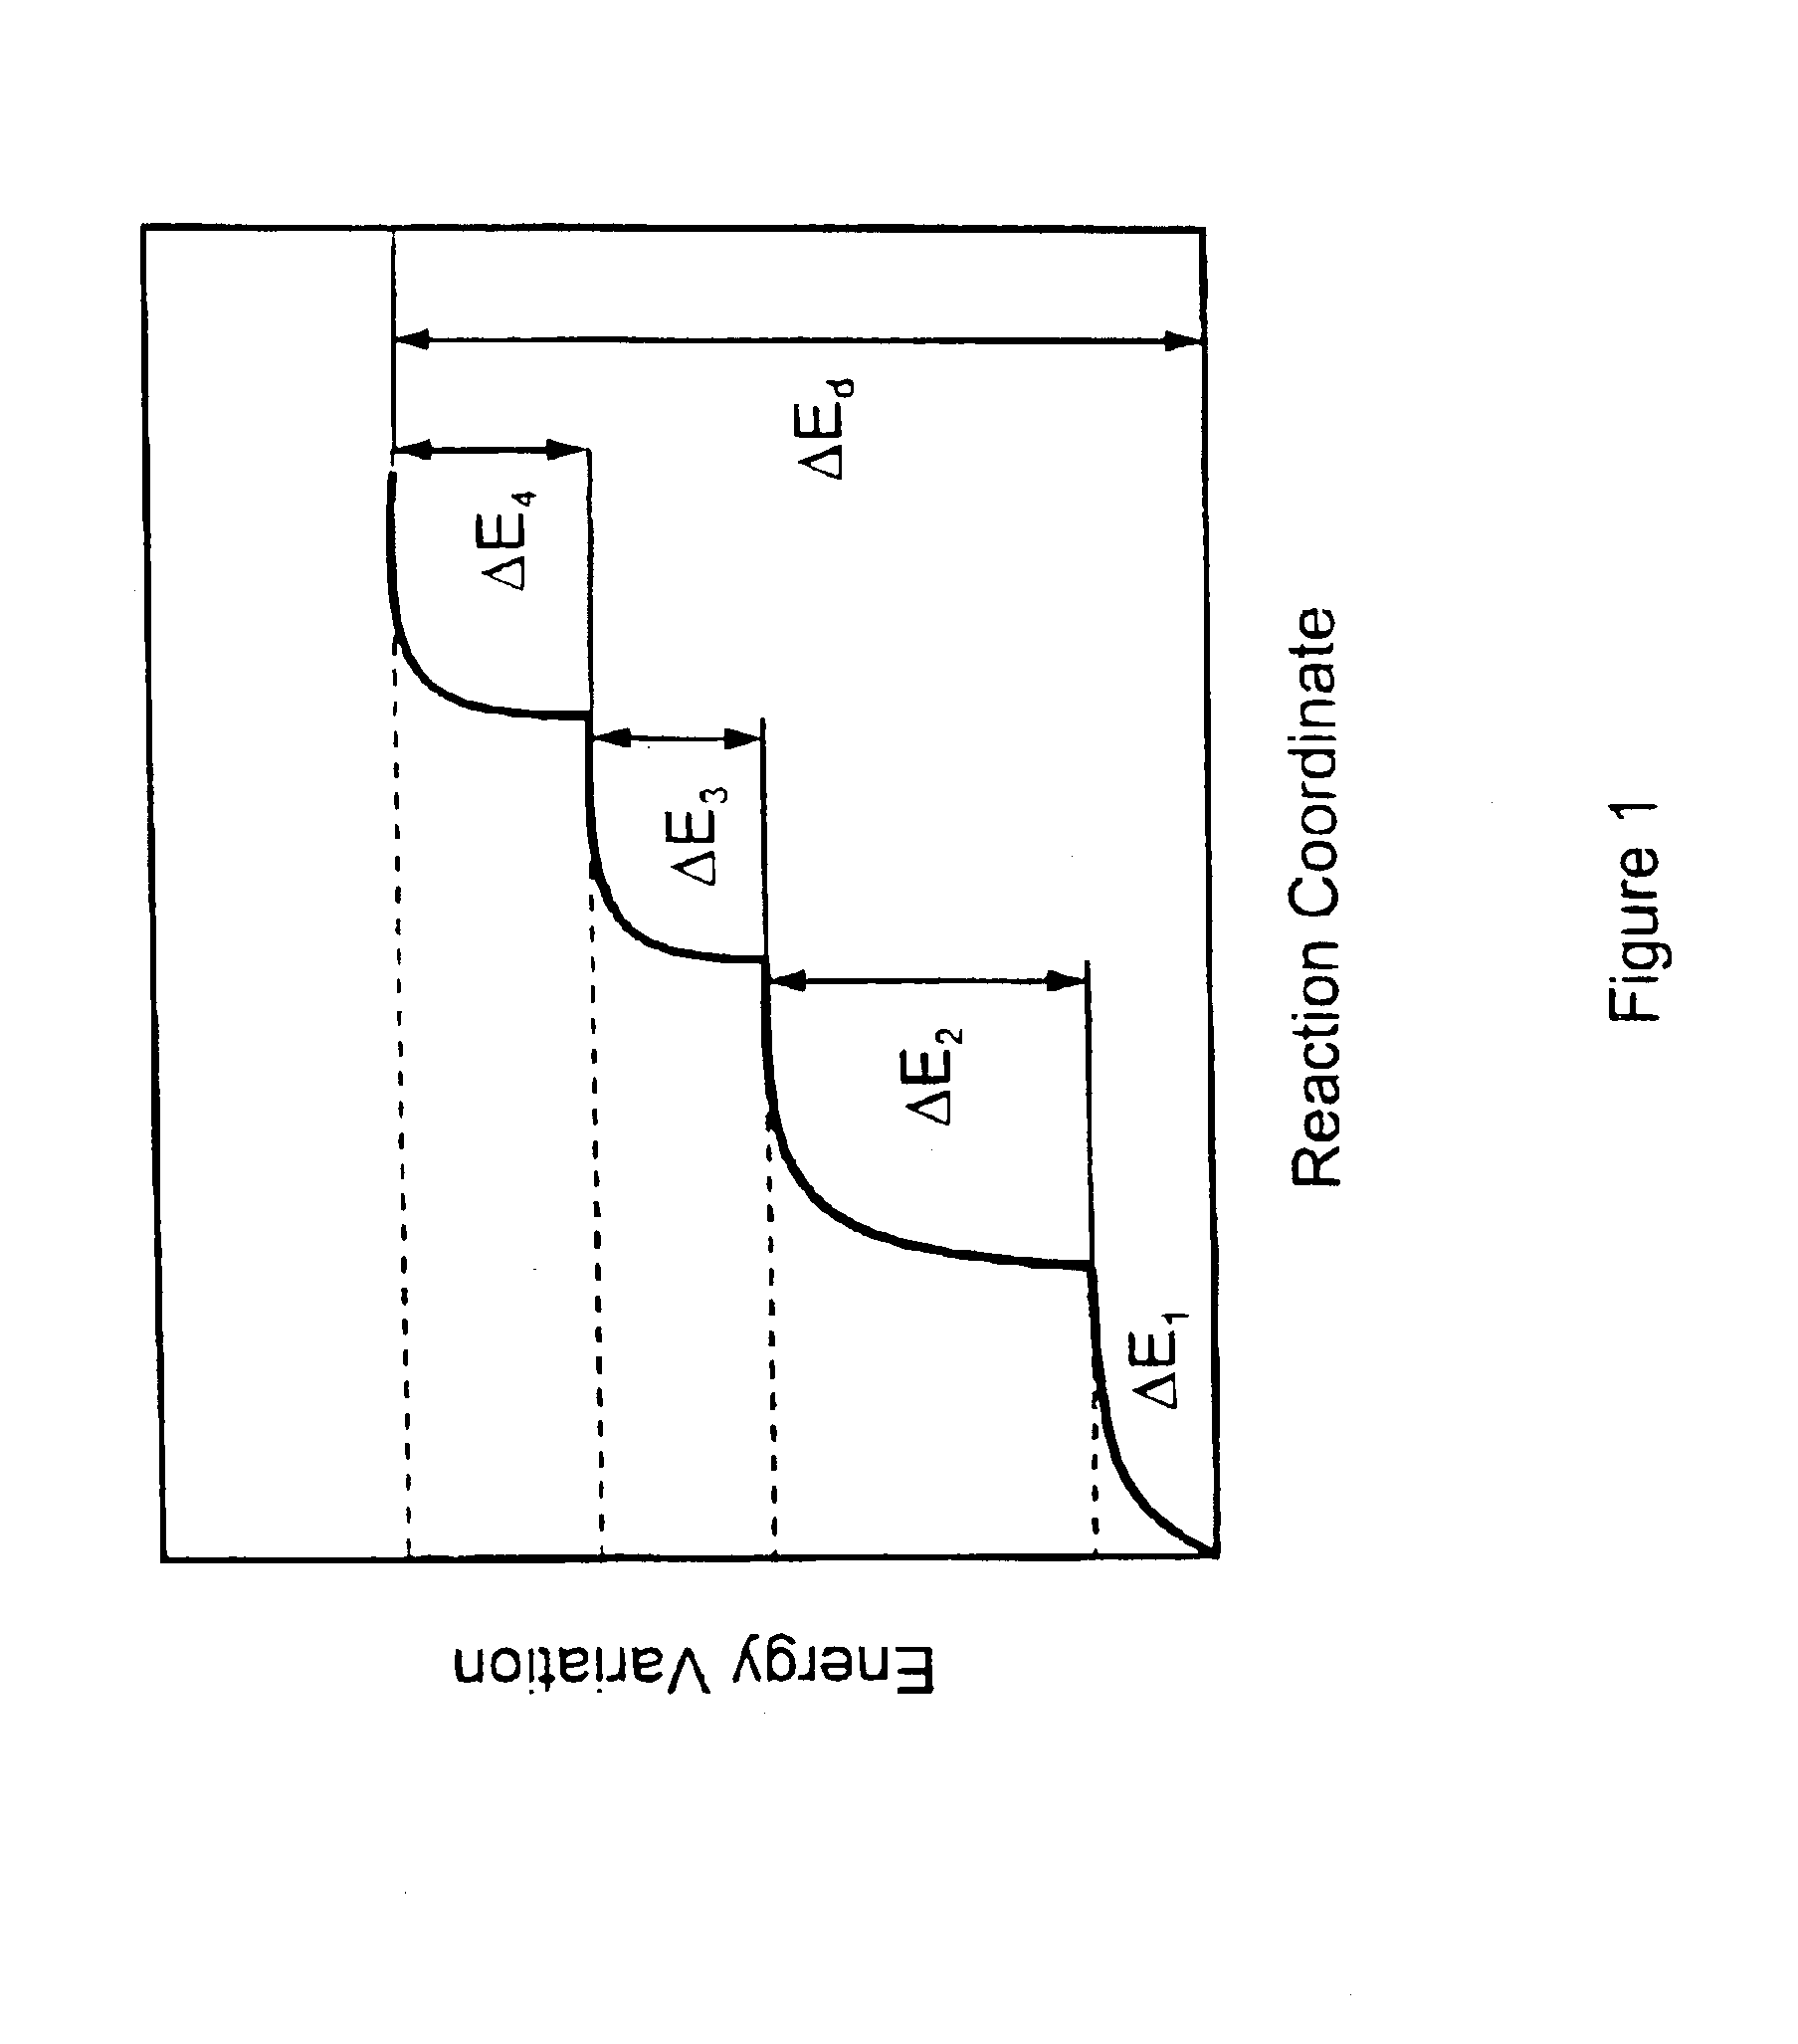 Process for the preparation of accelerated release formulations using compressed fluids